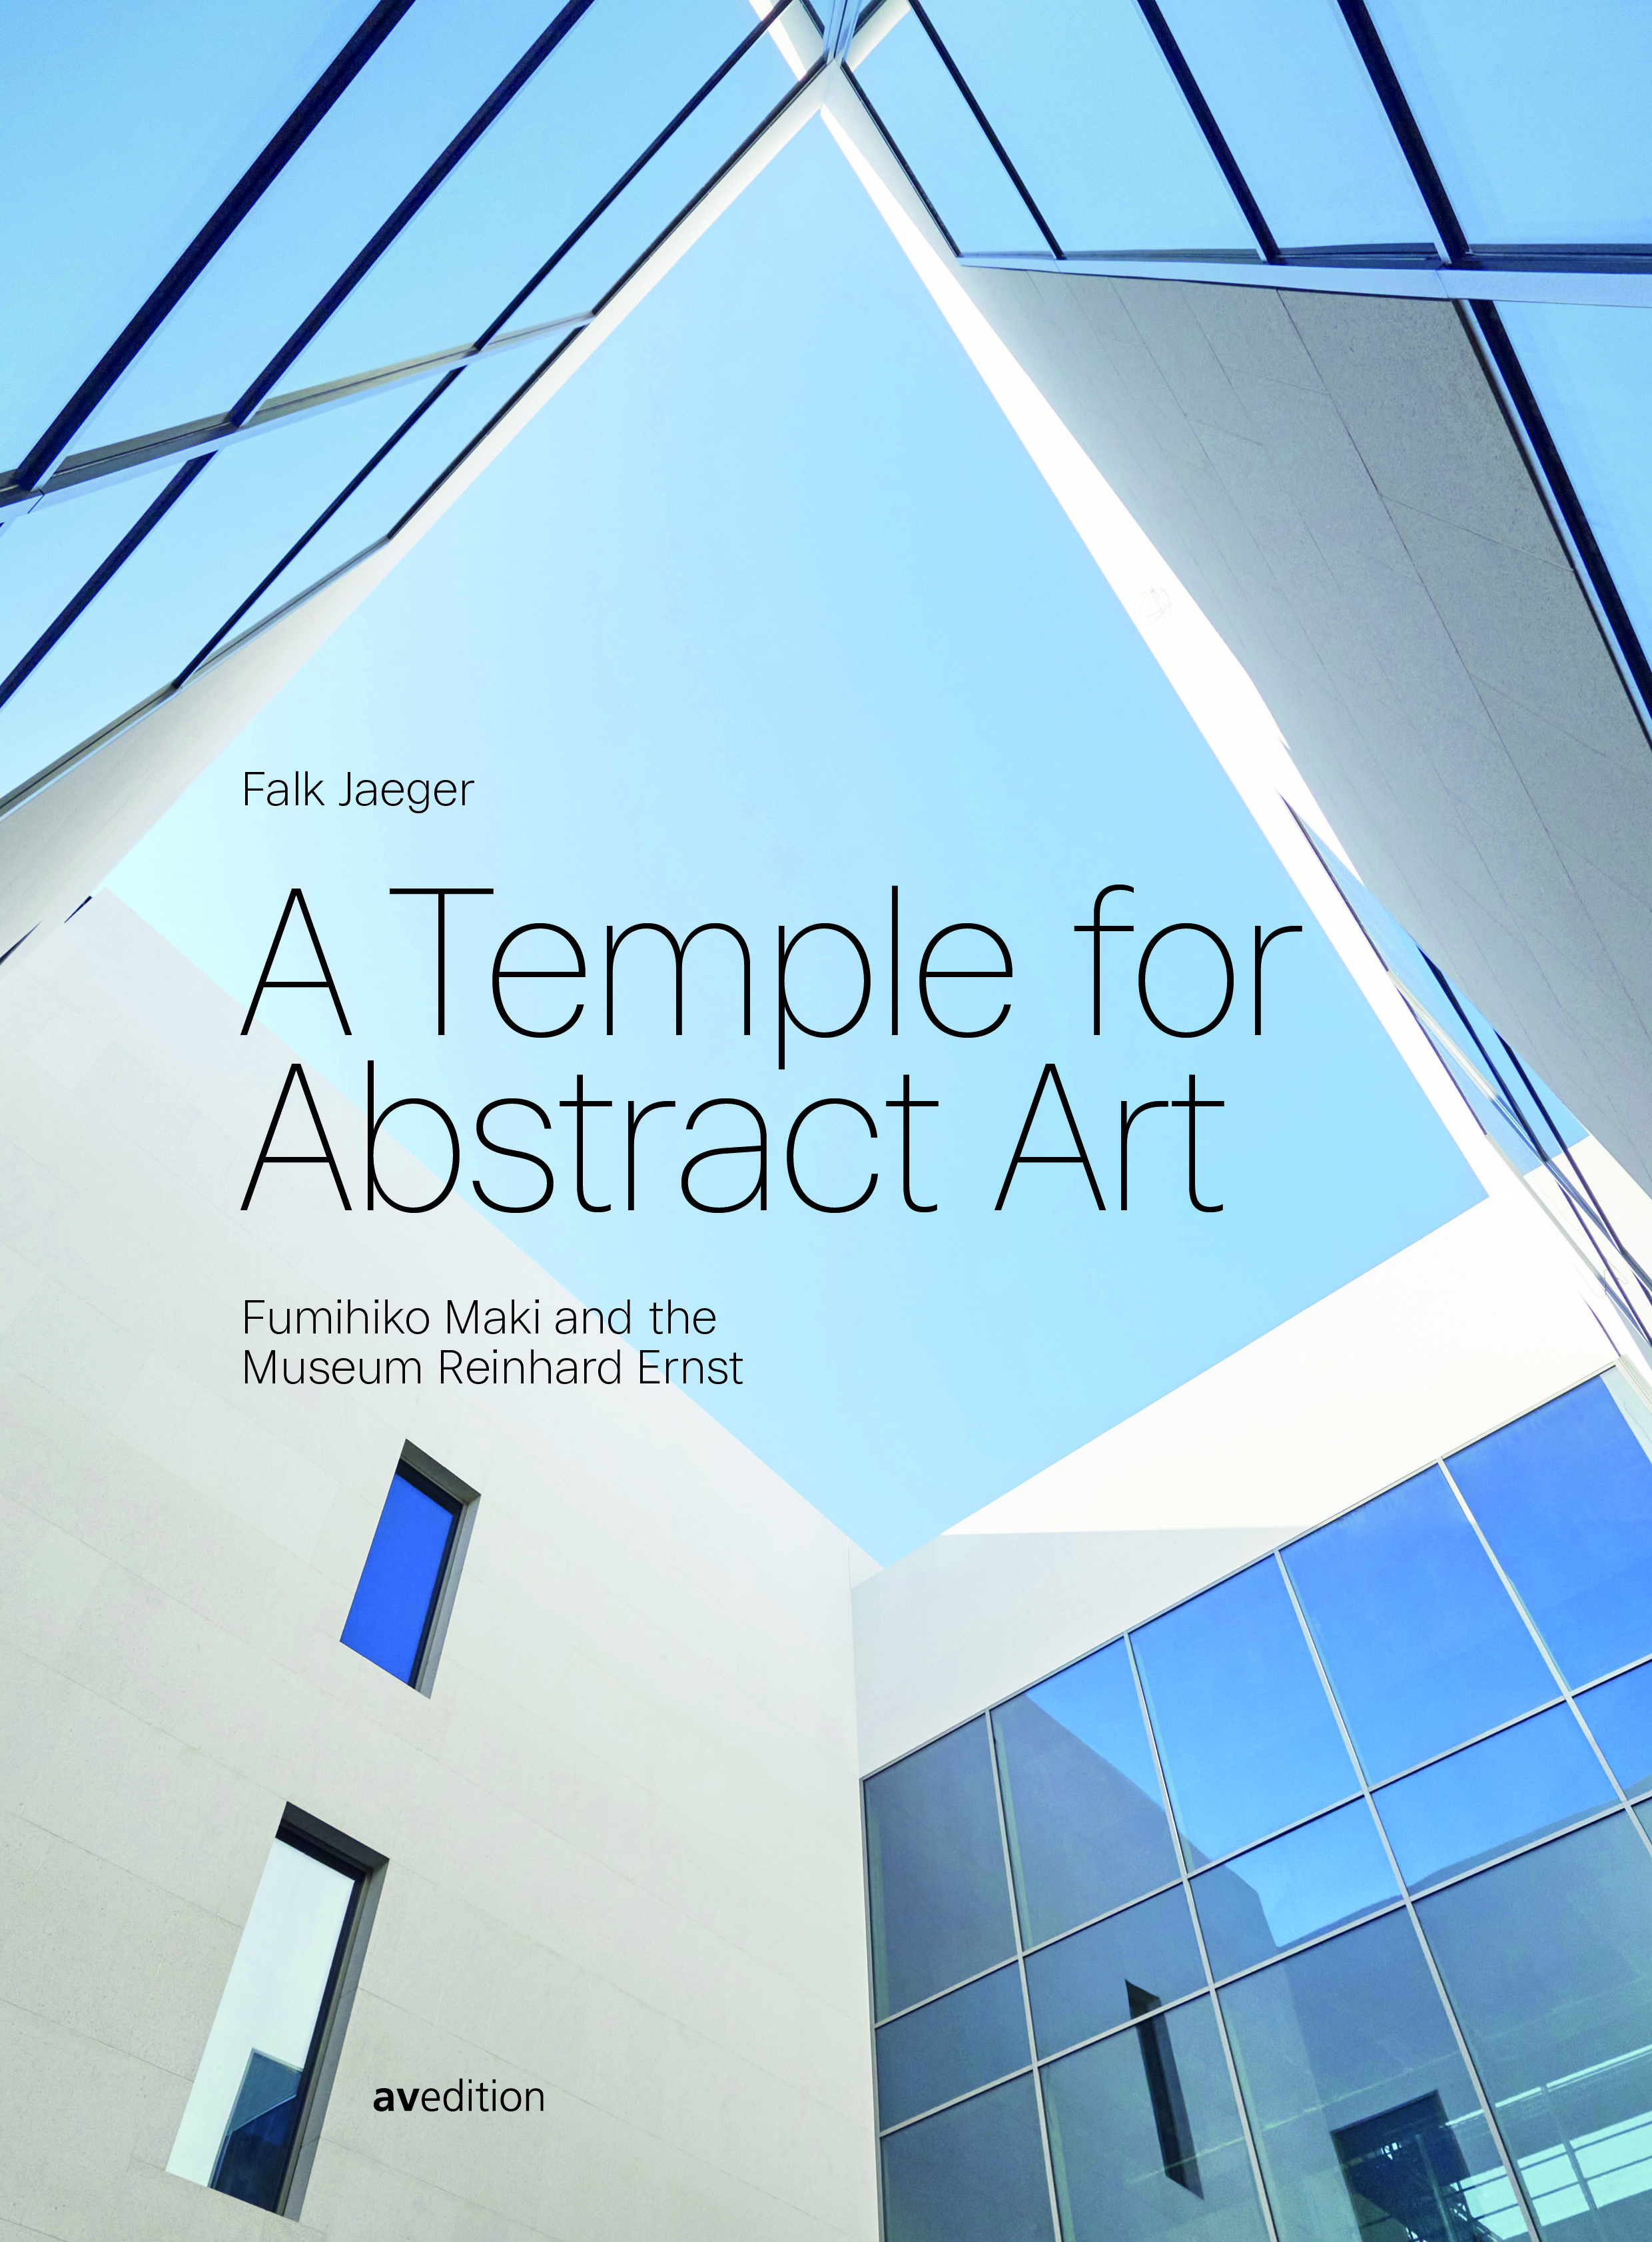 A Temple for Abstact Art – Fumihiko Maki and the Museum Reinhard Ernst